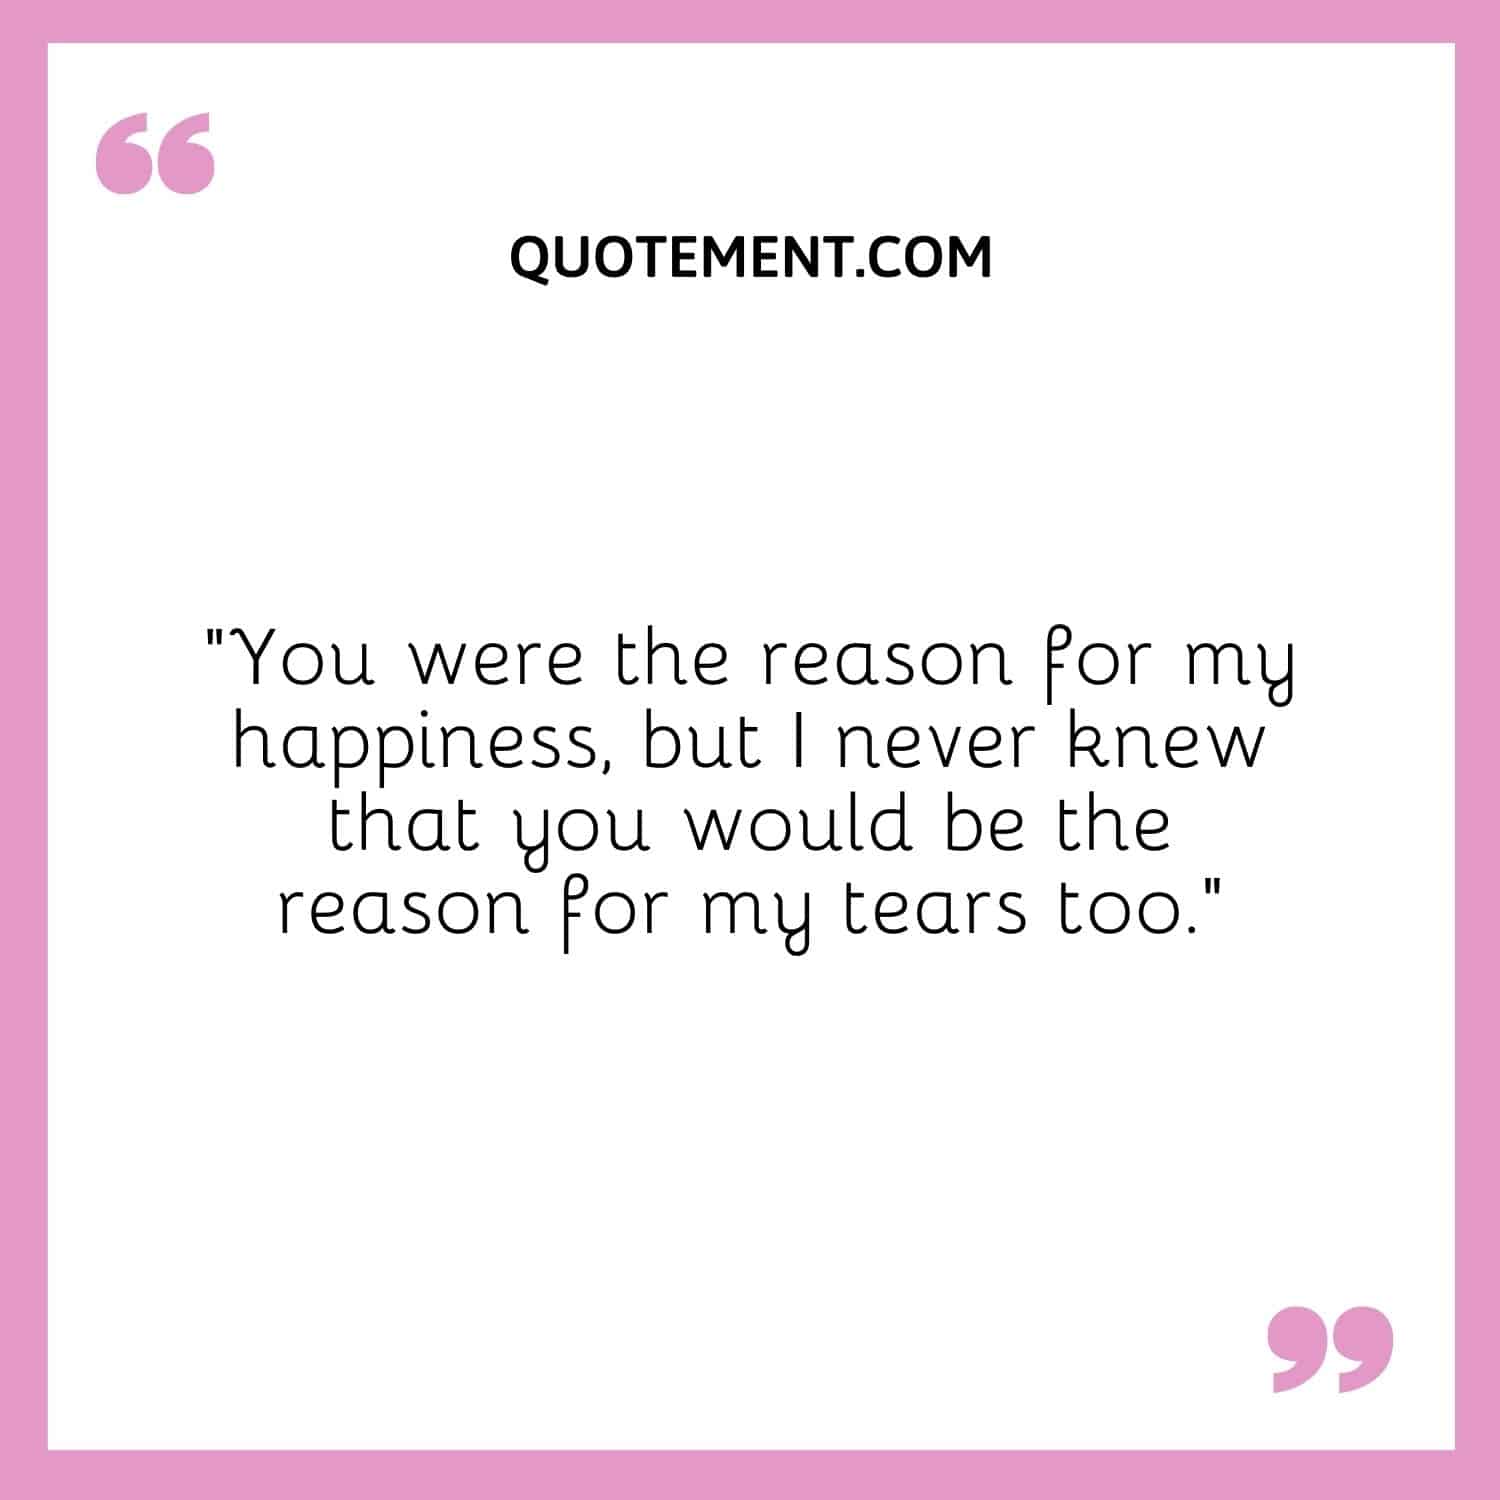 You were the reason for my happiness